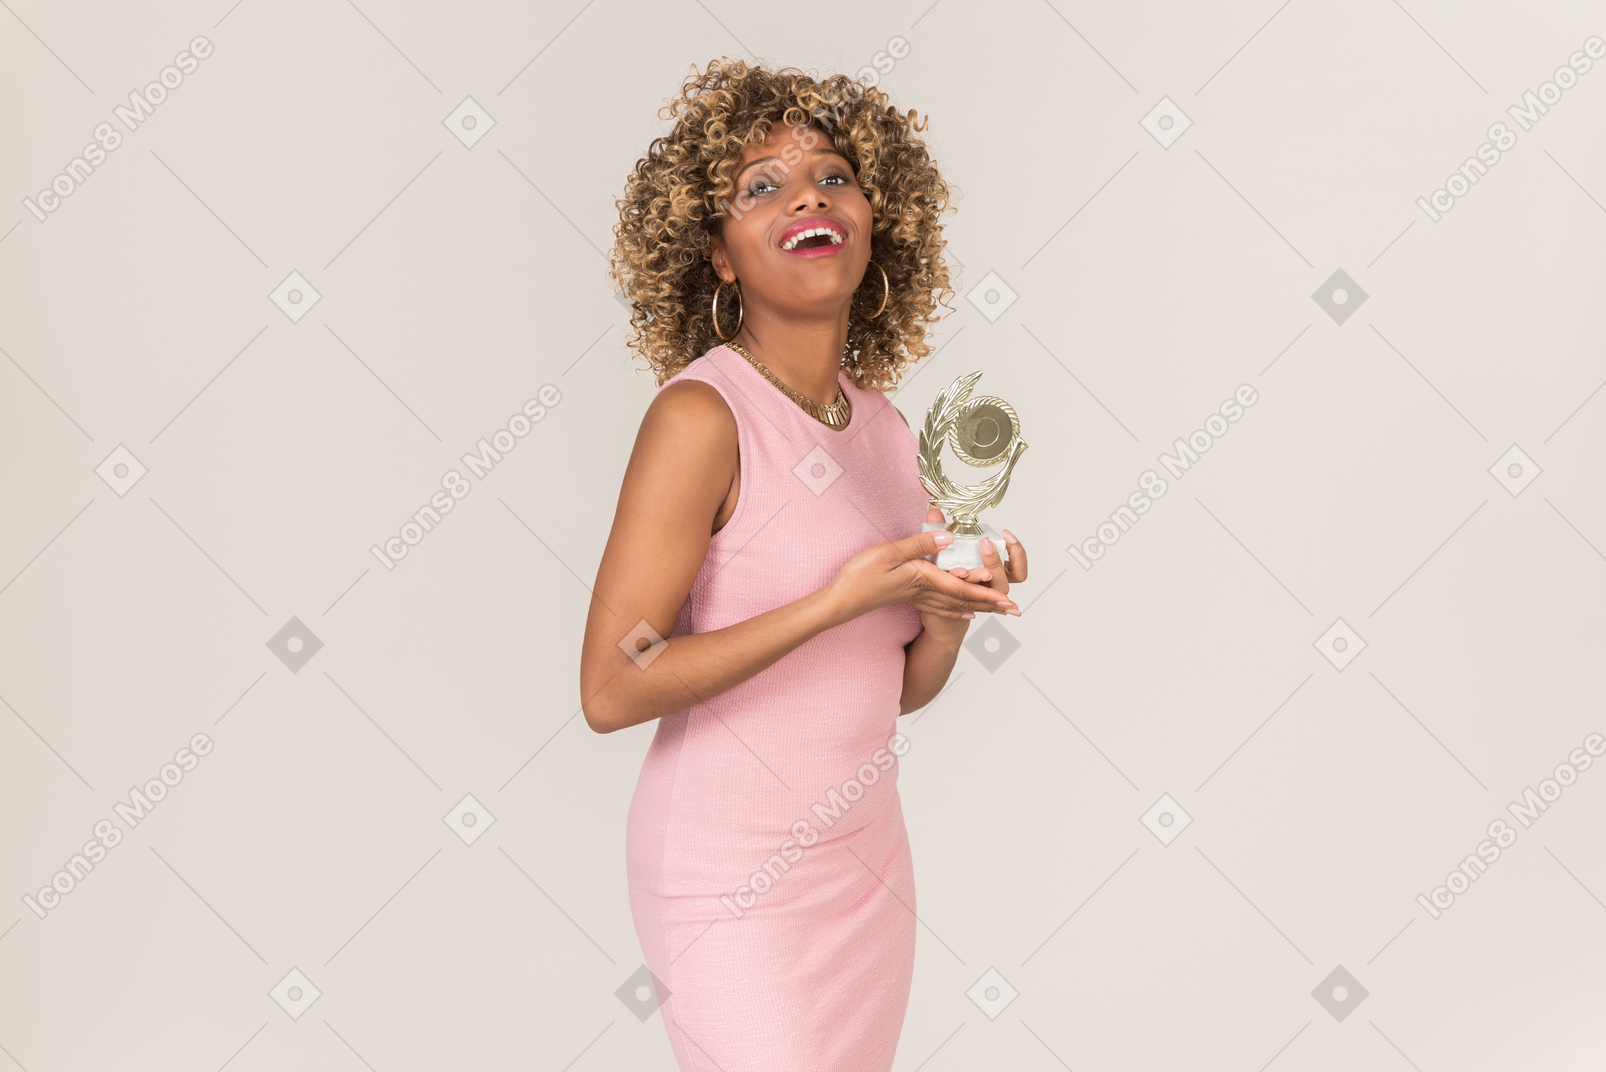 A young black fluffy-haired woman in a pastel pink cocktail dress, standing with a prize in her hands, against a plain grey background